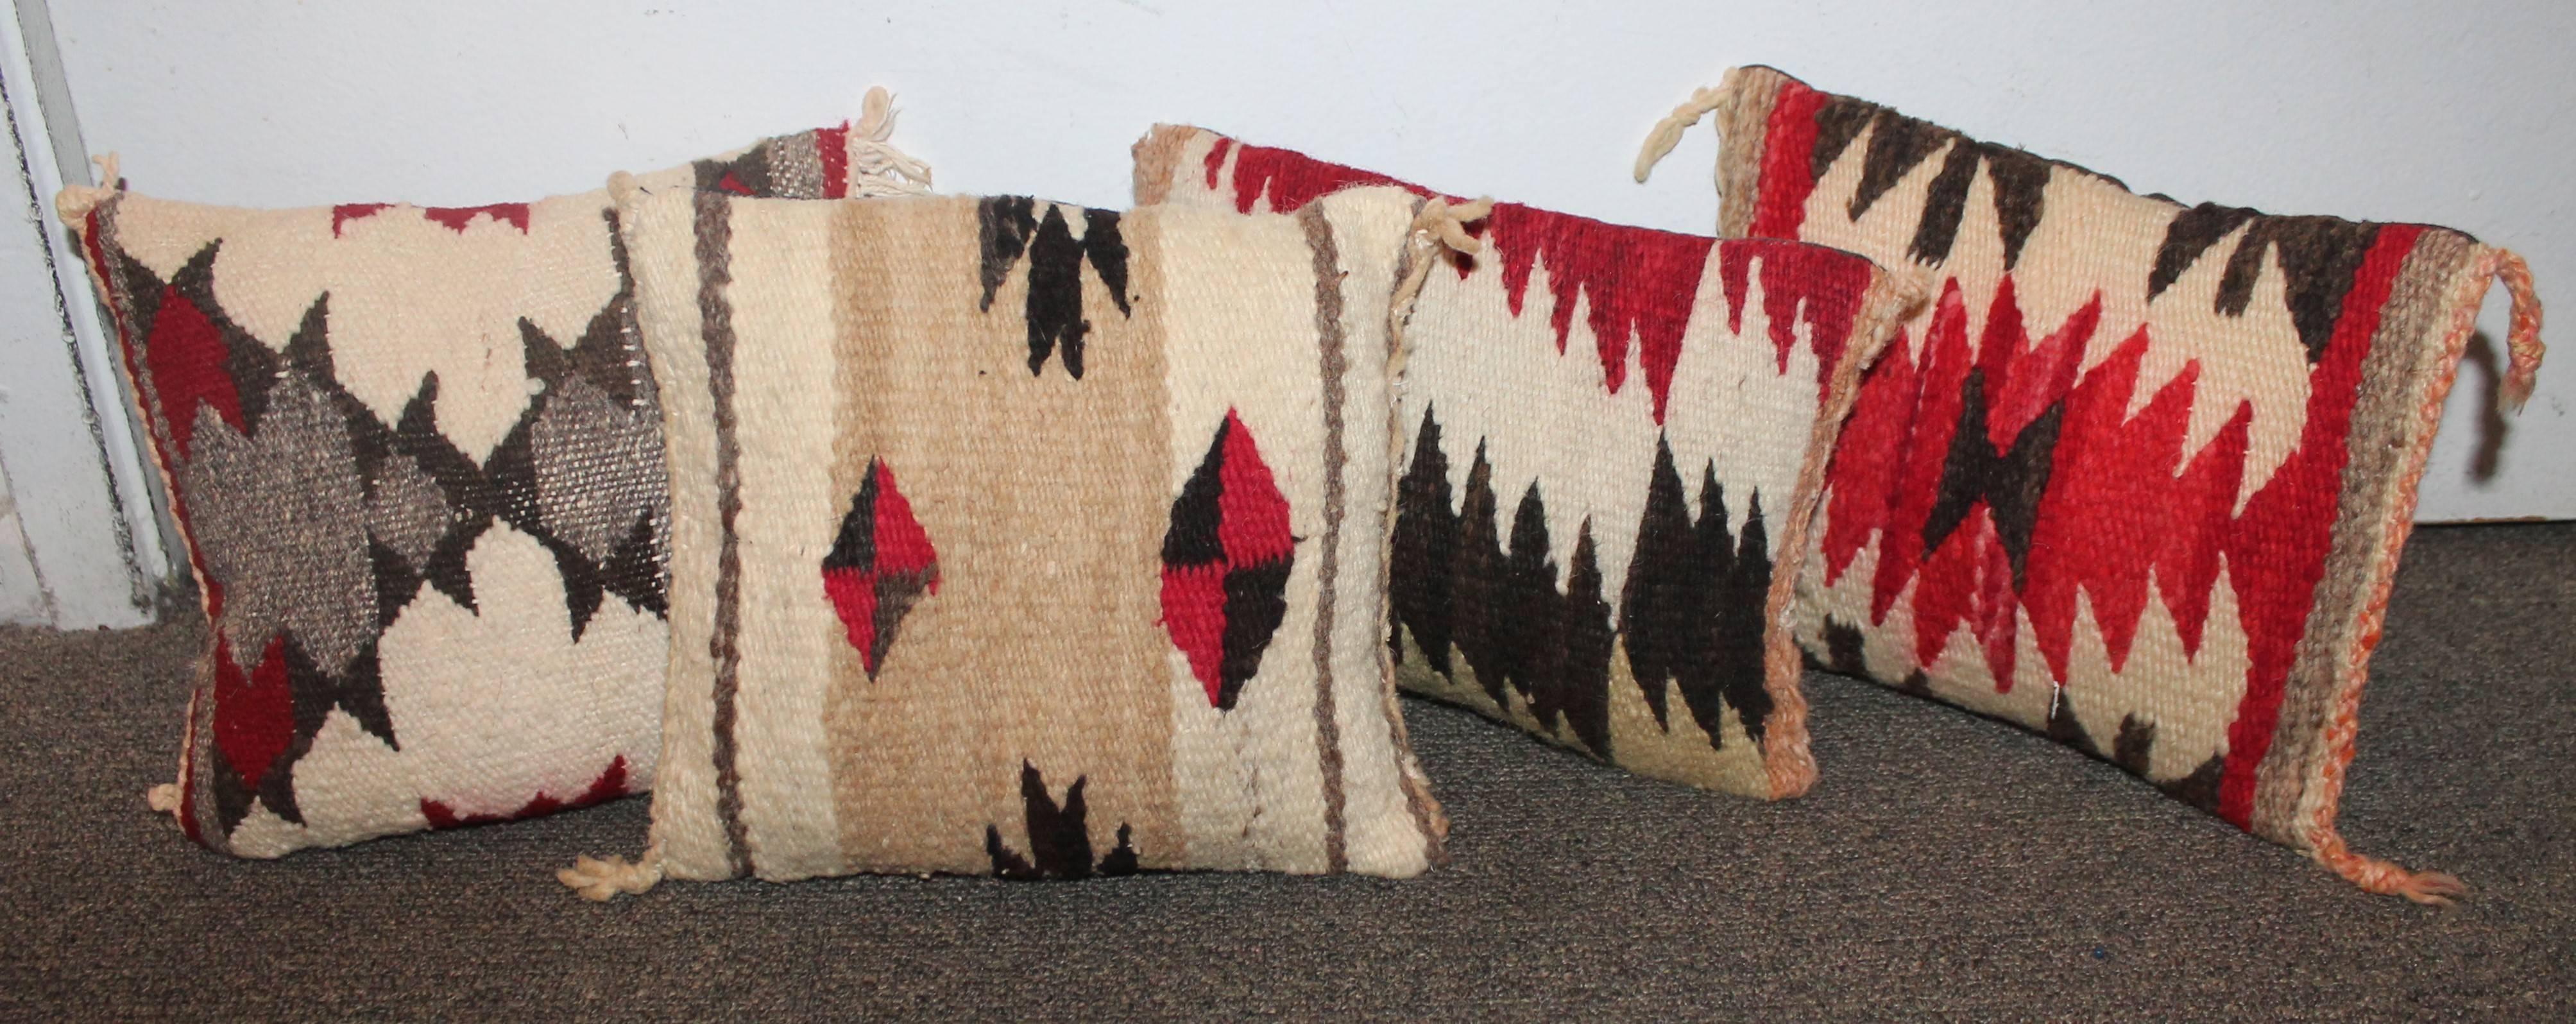 These little gems are amazing patterns and small Indian weaving's made into pillows. Really great as a collection. The sizes left to right are as follows: 8